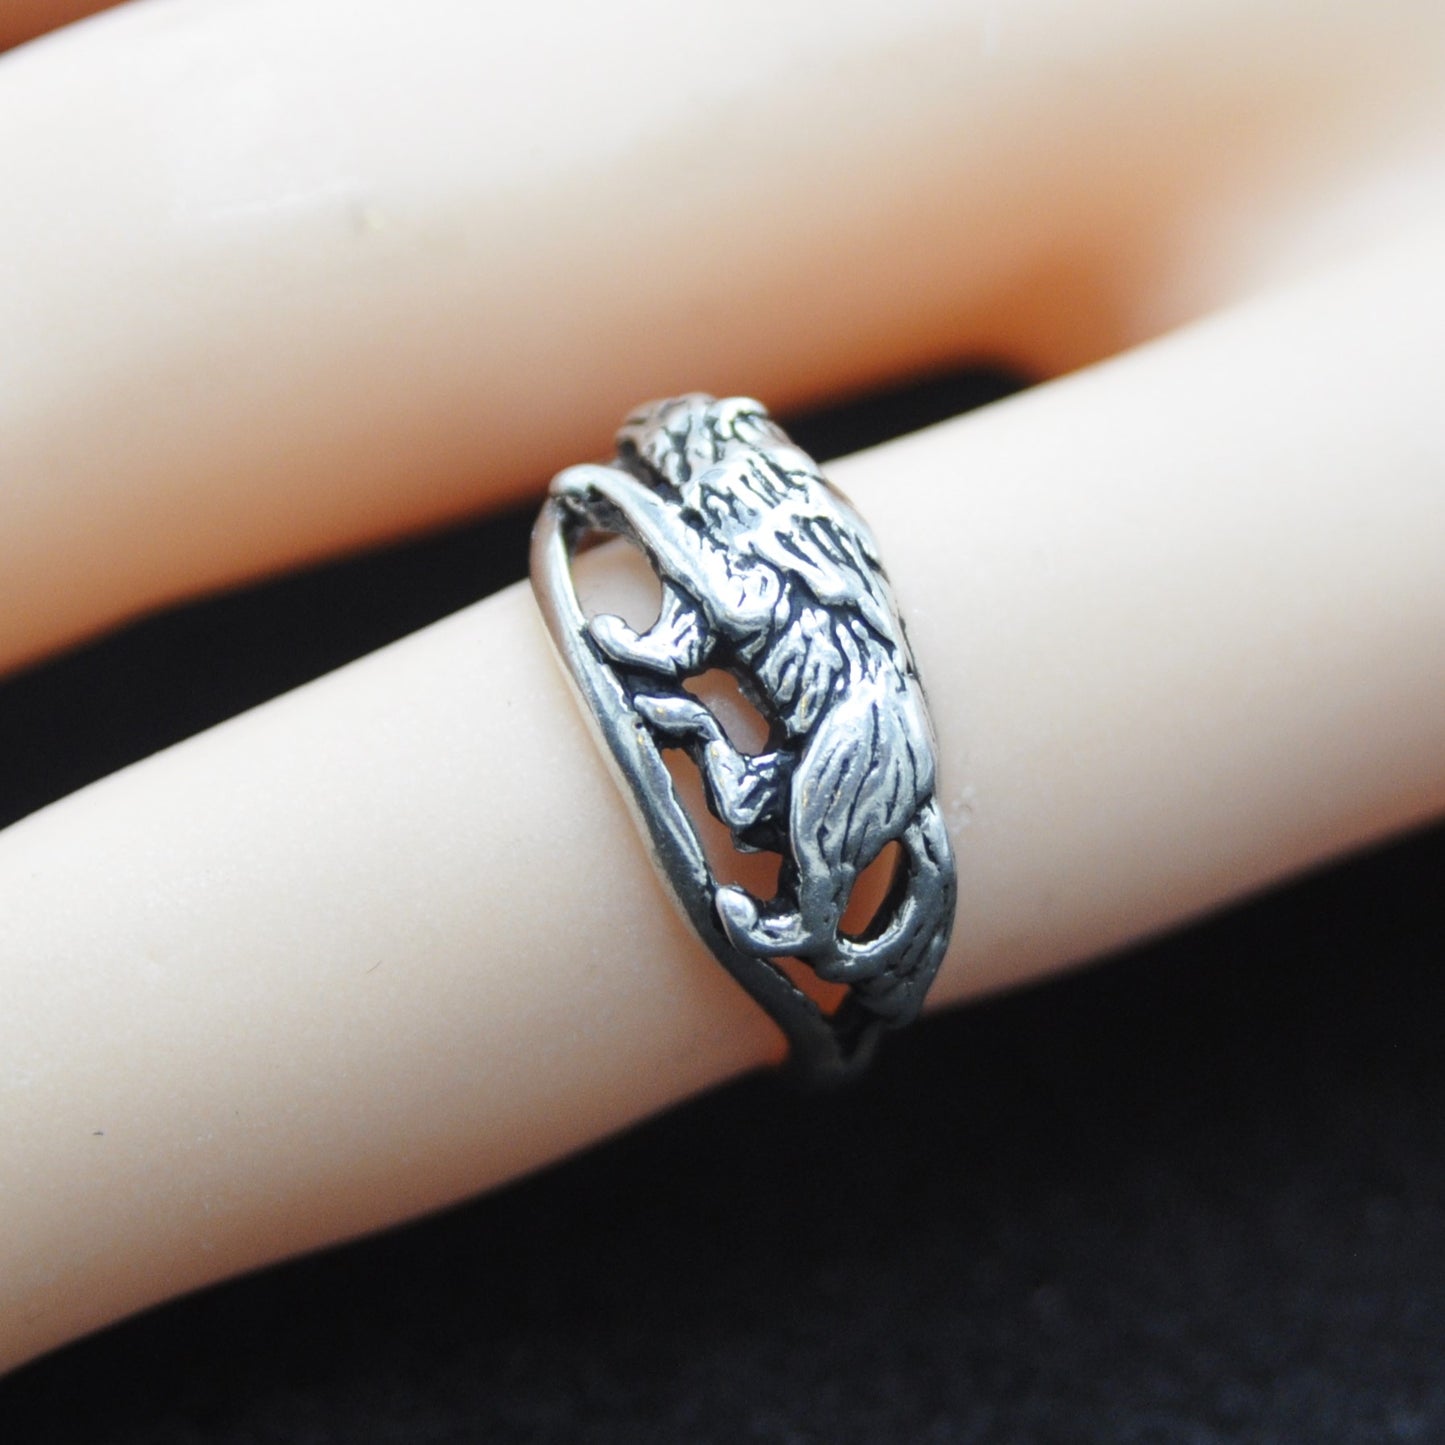 Wolf Ring Sterling Silver .925 Vulnerable Species Size 6-12 For Men or Women